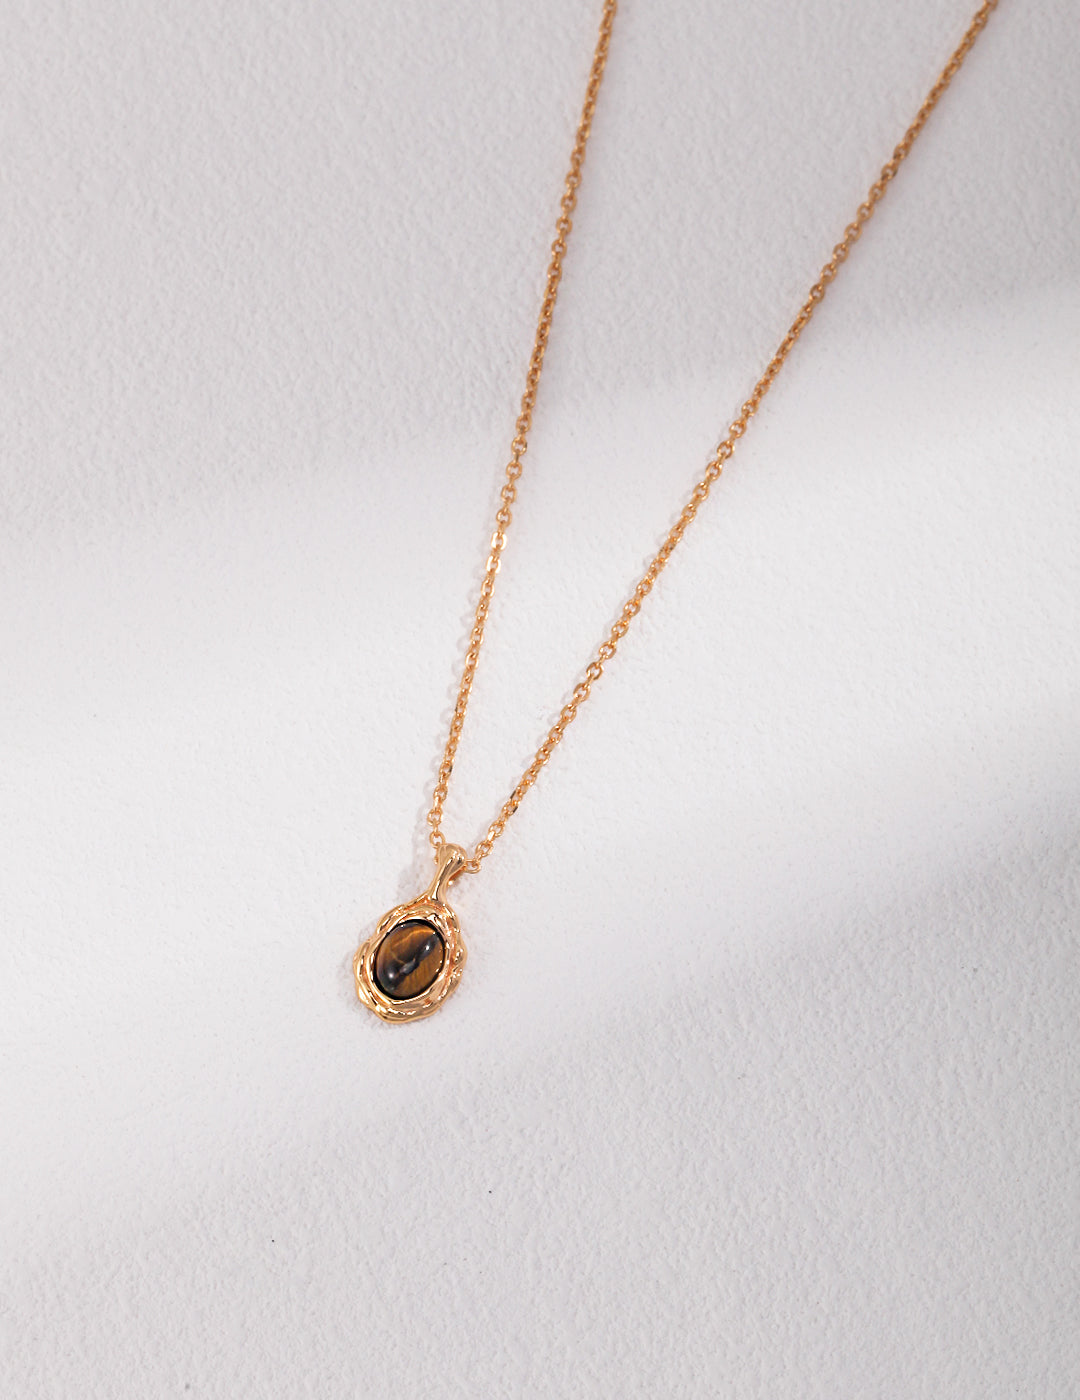 Pure silver necklace with a tiger eye stone pendant